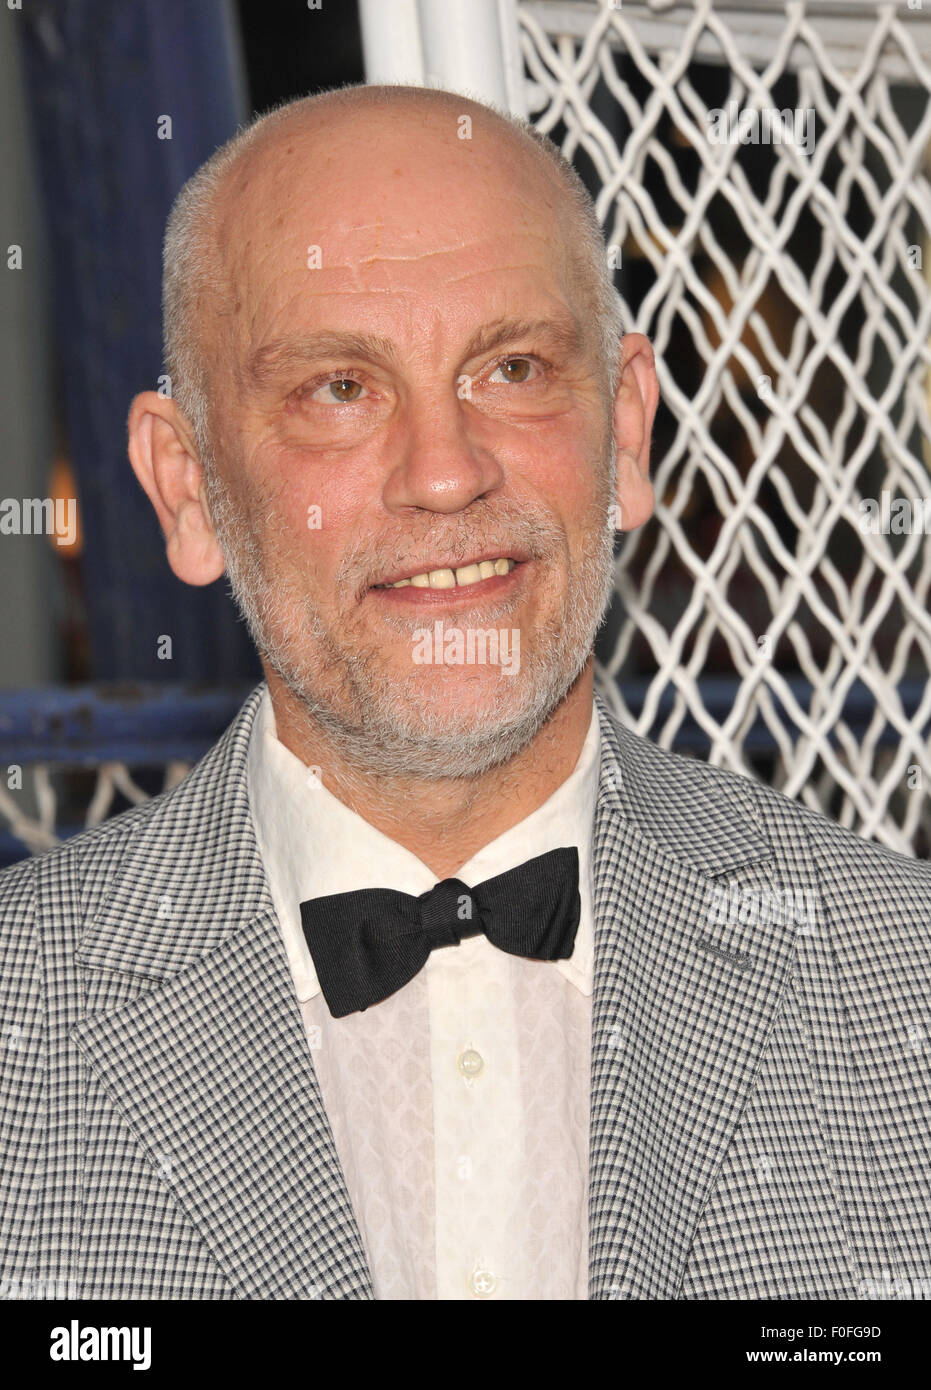 LOS ANGELES, CA - SEPTEMBER 30, 2010: John Malkovich at the world premiere of his new movie Secretariat at the El Capitan Theatre, Hollywood. Stock Photo